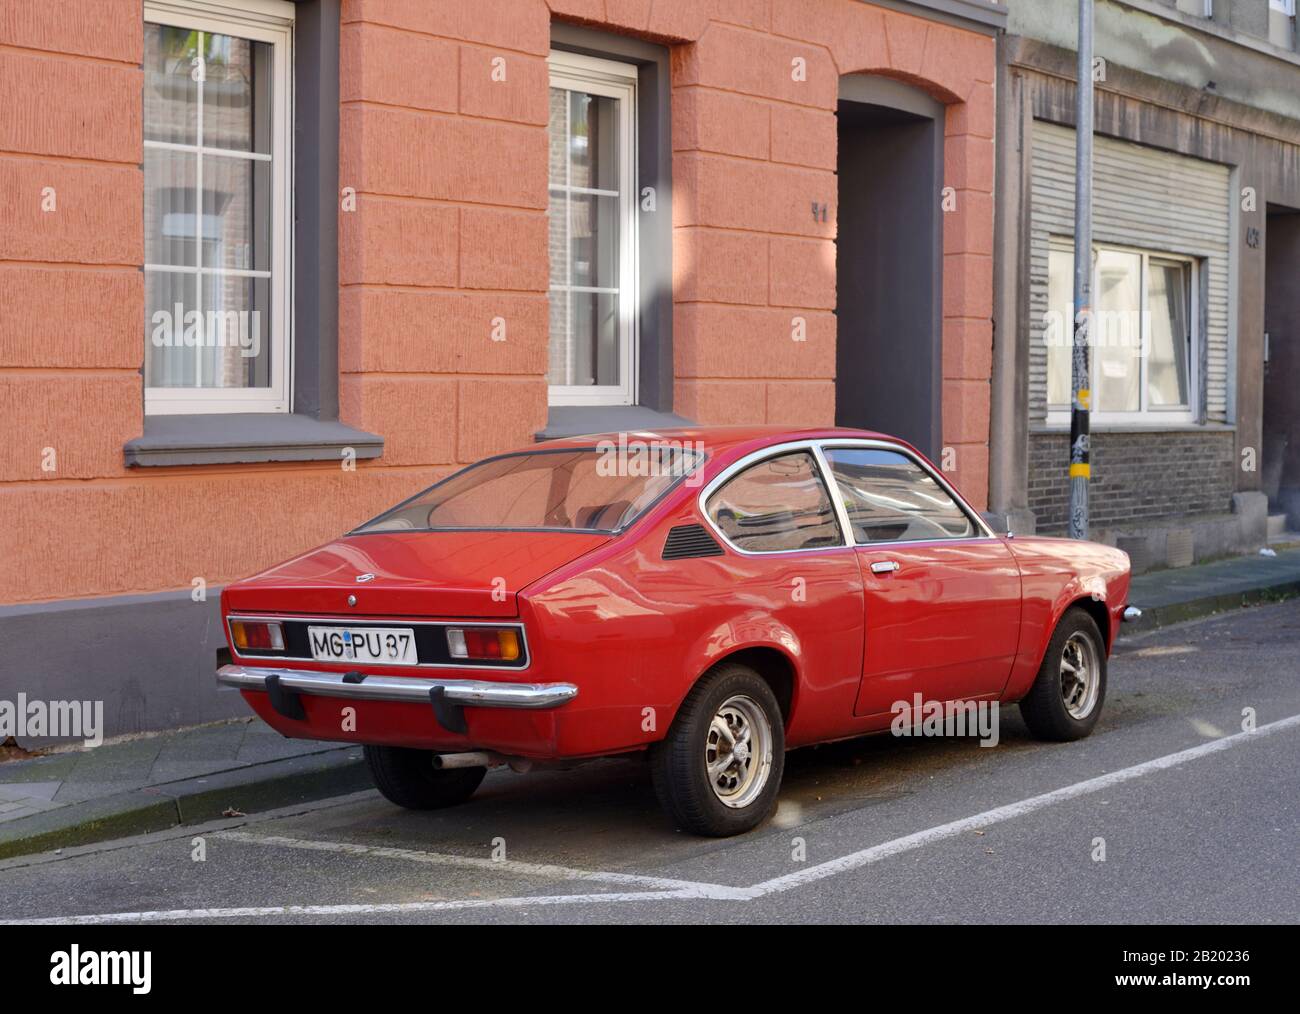 Red classic german Opel car in the street Stock Photo